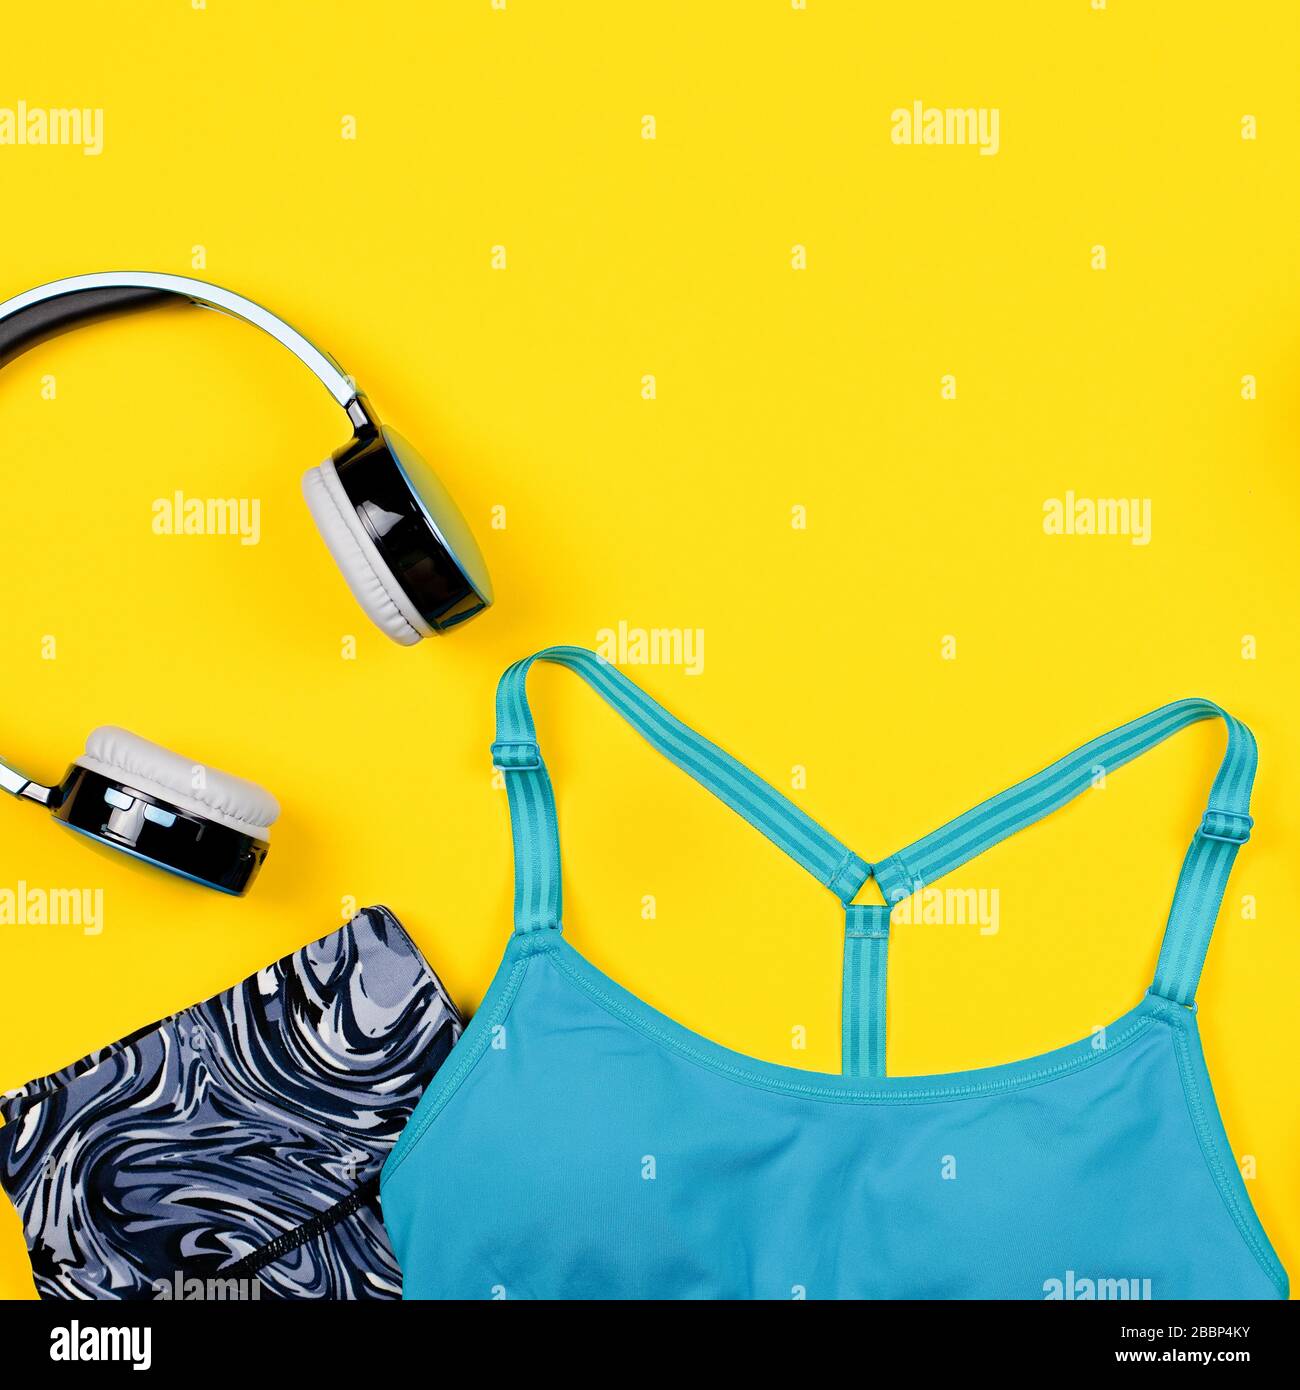 https://c8.alamy.com/comp/2BBP4KY/layout-of-sport-clothes-and-accessories-for-women-sports-bra-sneakers-headphones-on-yellow-background-top-view-2BBP4KY.jpg